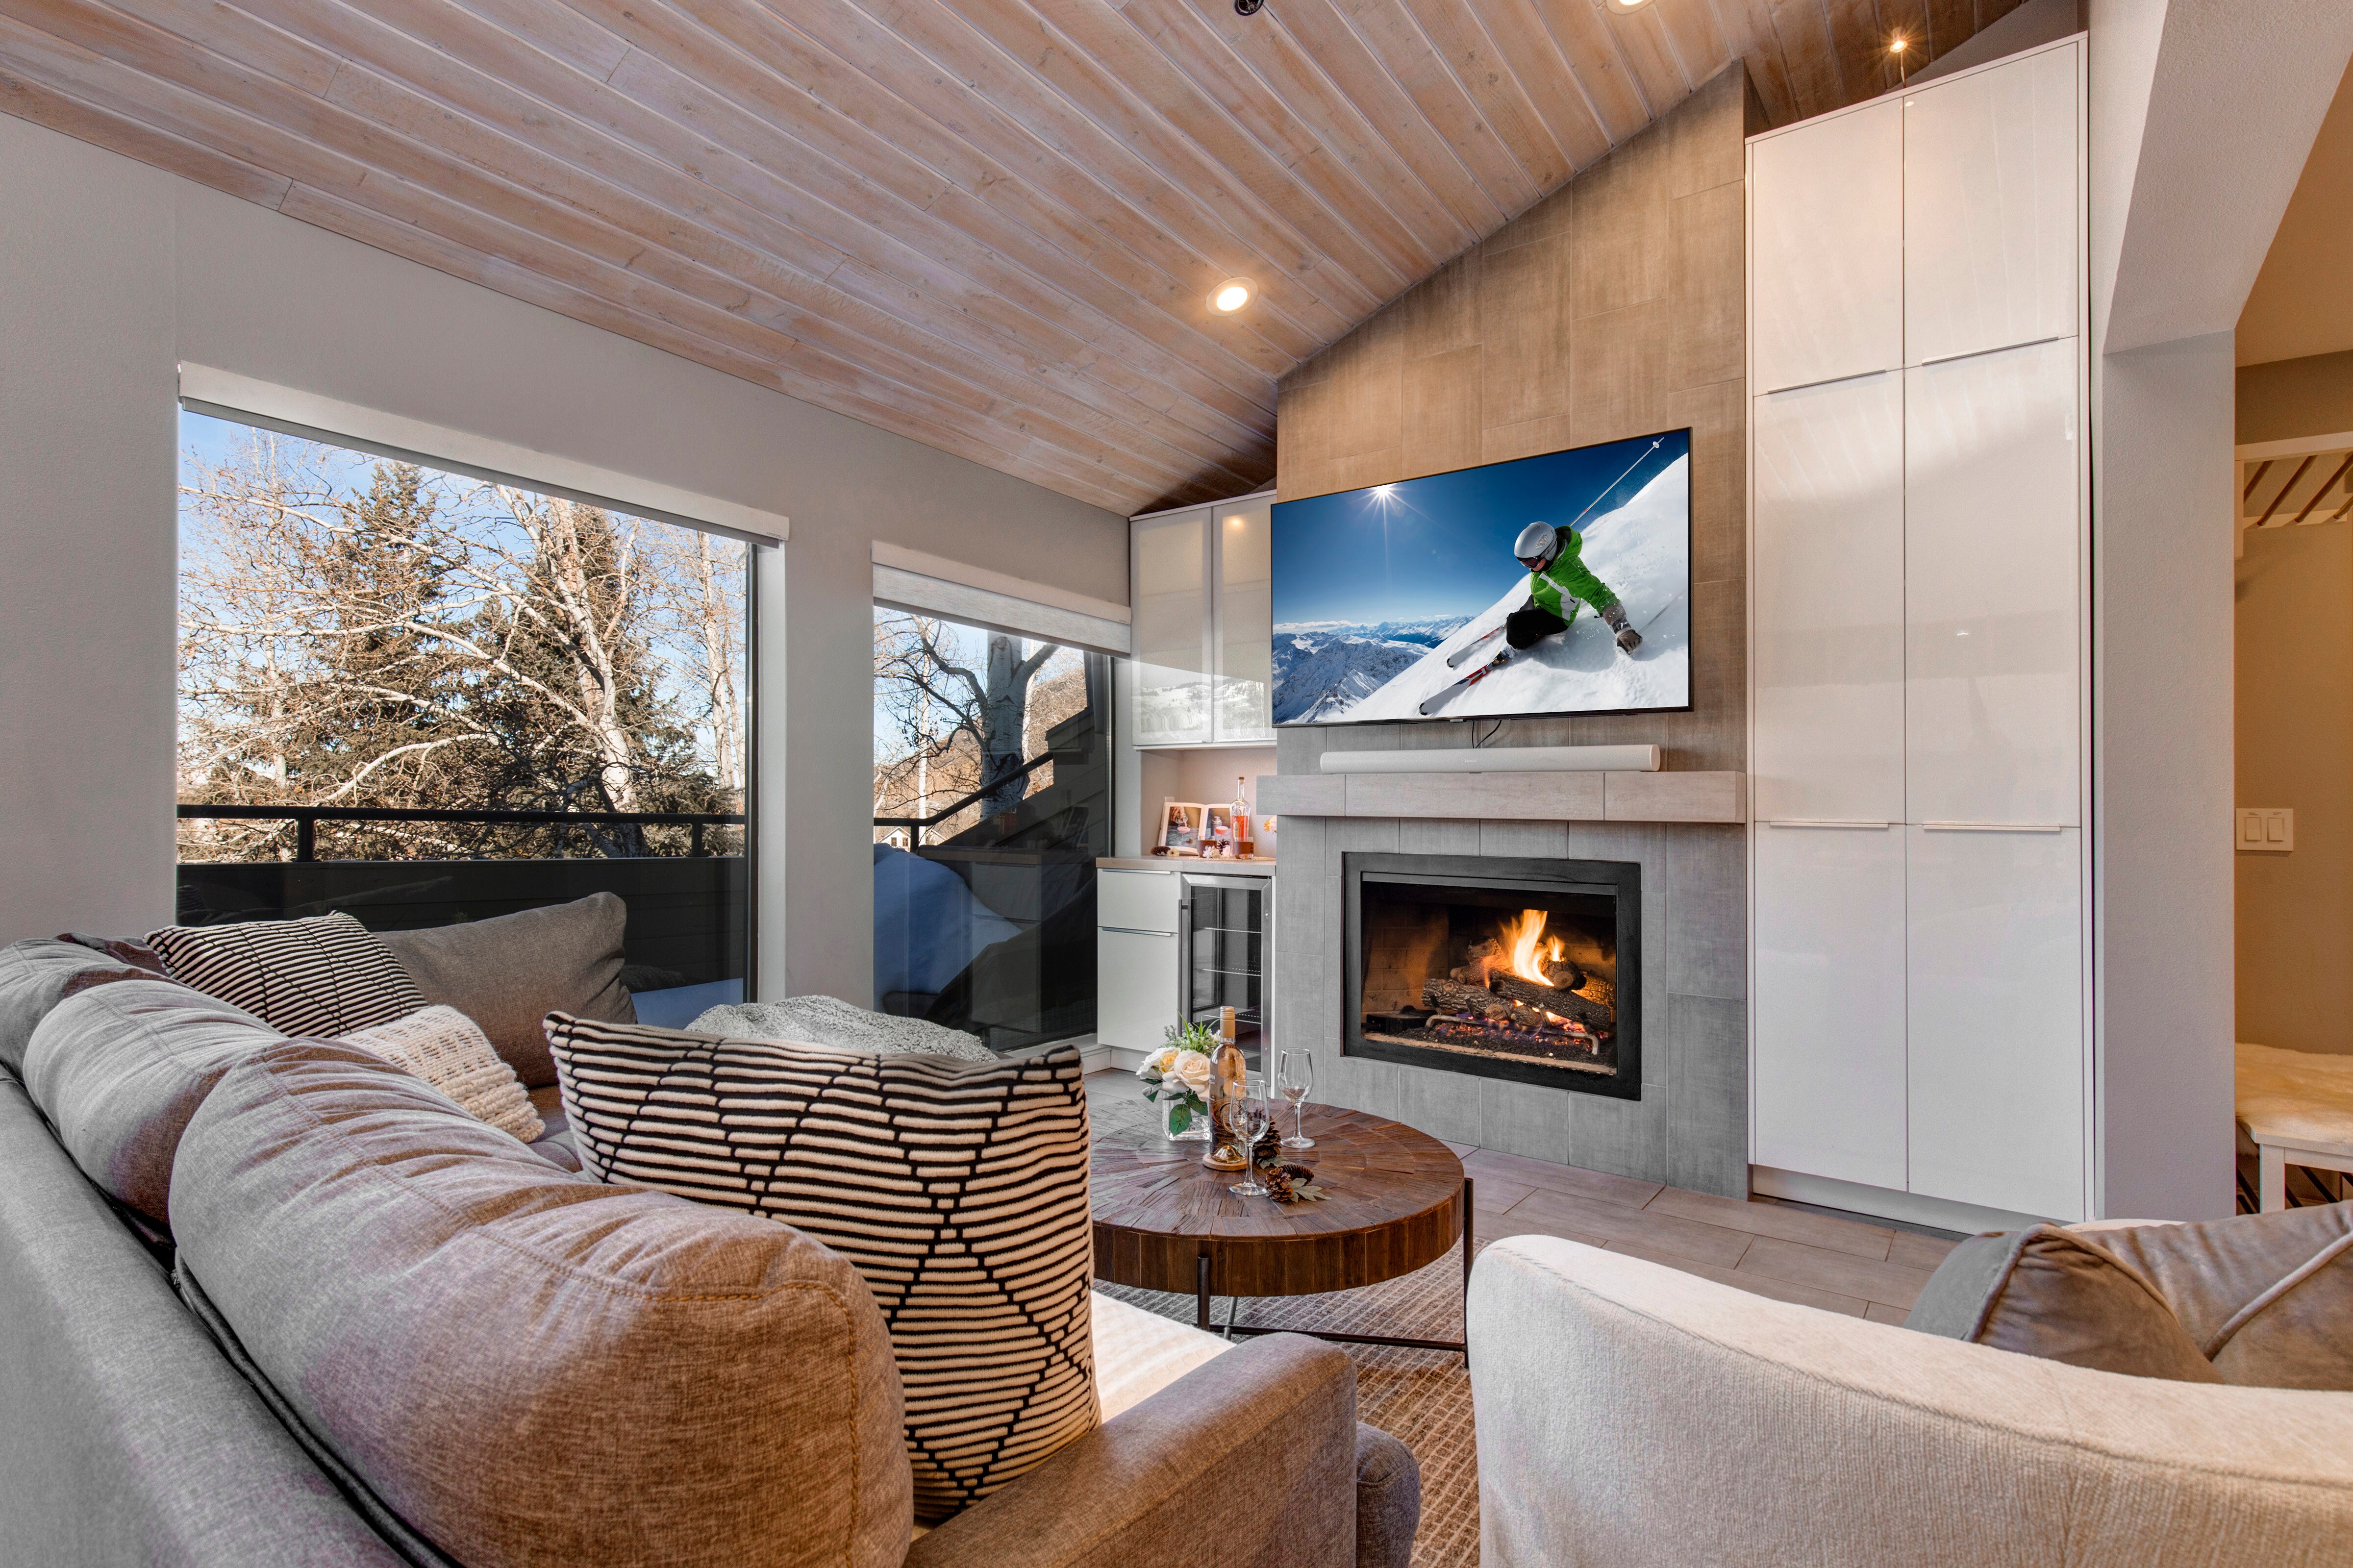 Living Room with plush sectional and arm chair, gas fireplace, 65" smart tv, wet bar with wine fridge,  built-in work station, and private deck access